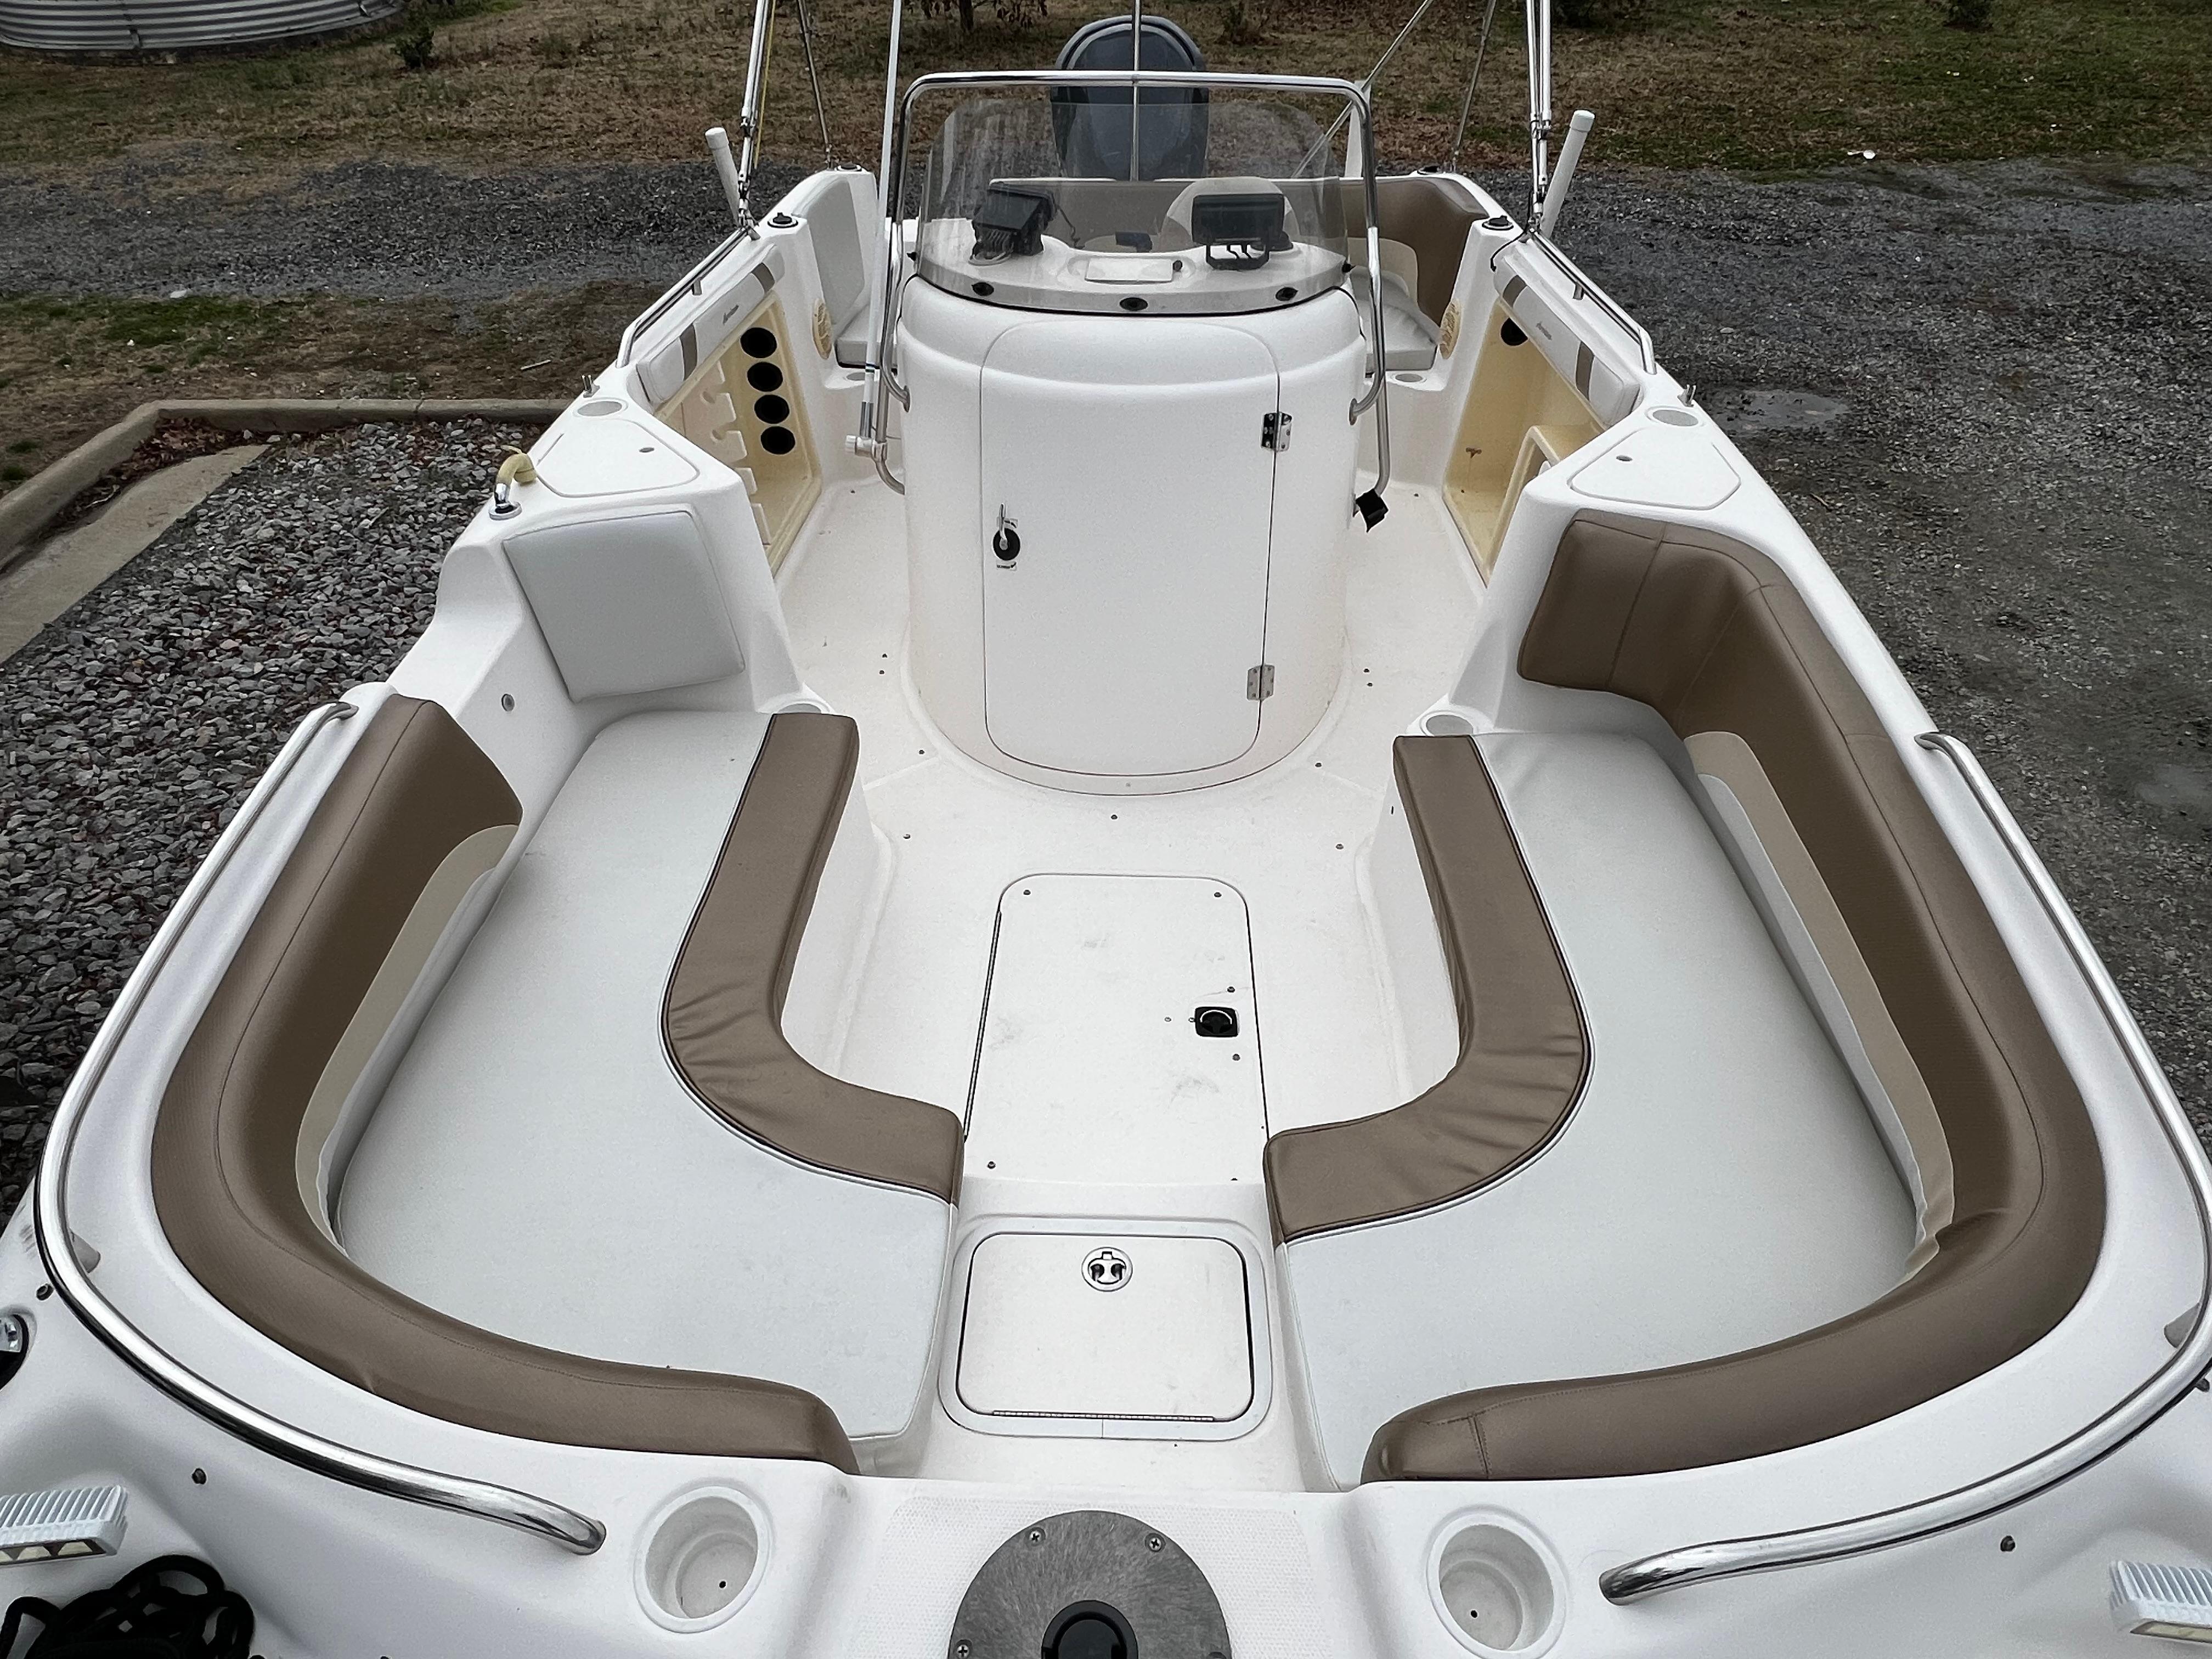 New 2004 Hurricane GS211 Fun Deck, 23803 South Chesterfield - Boat